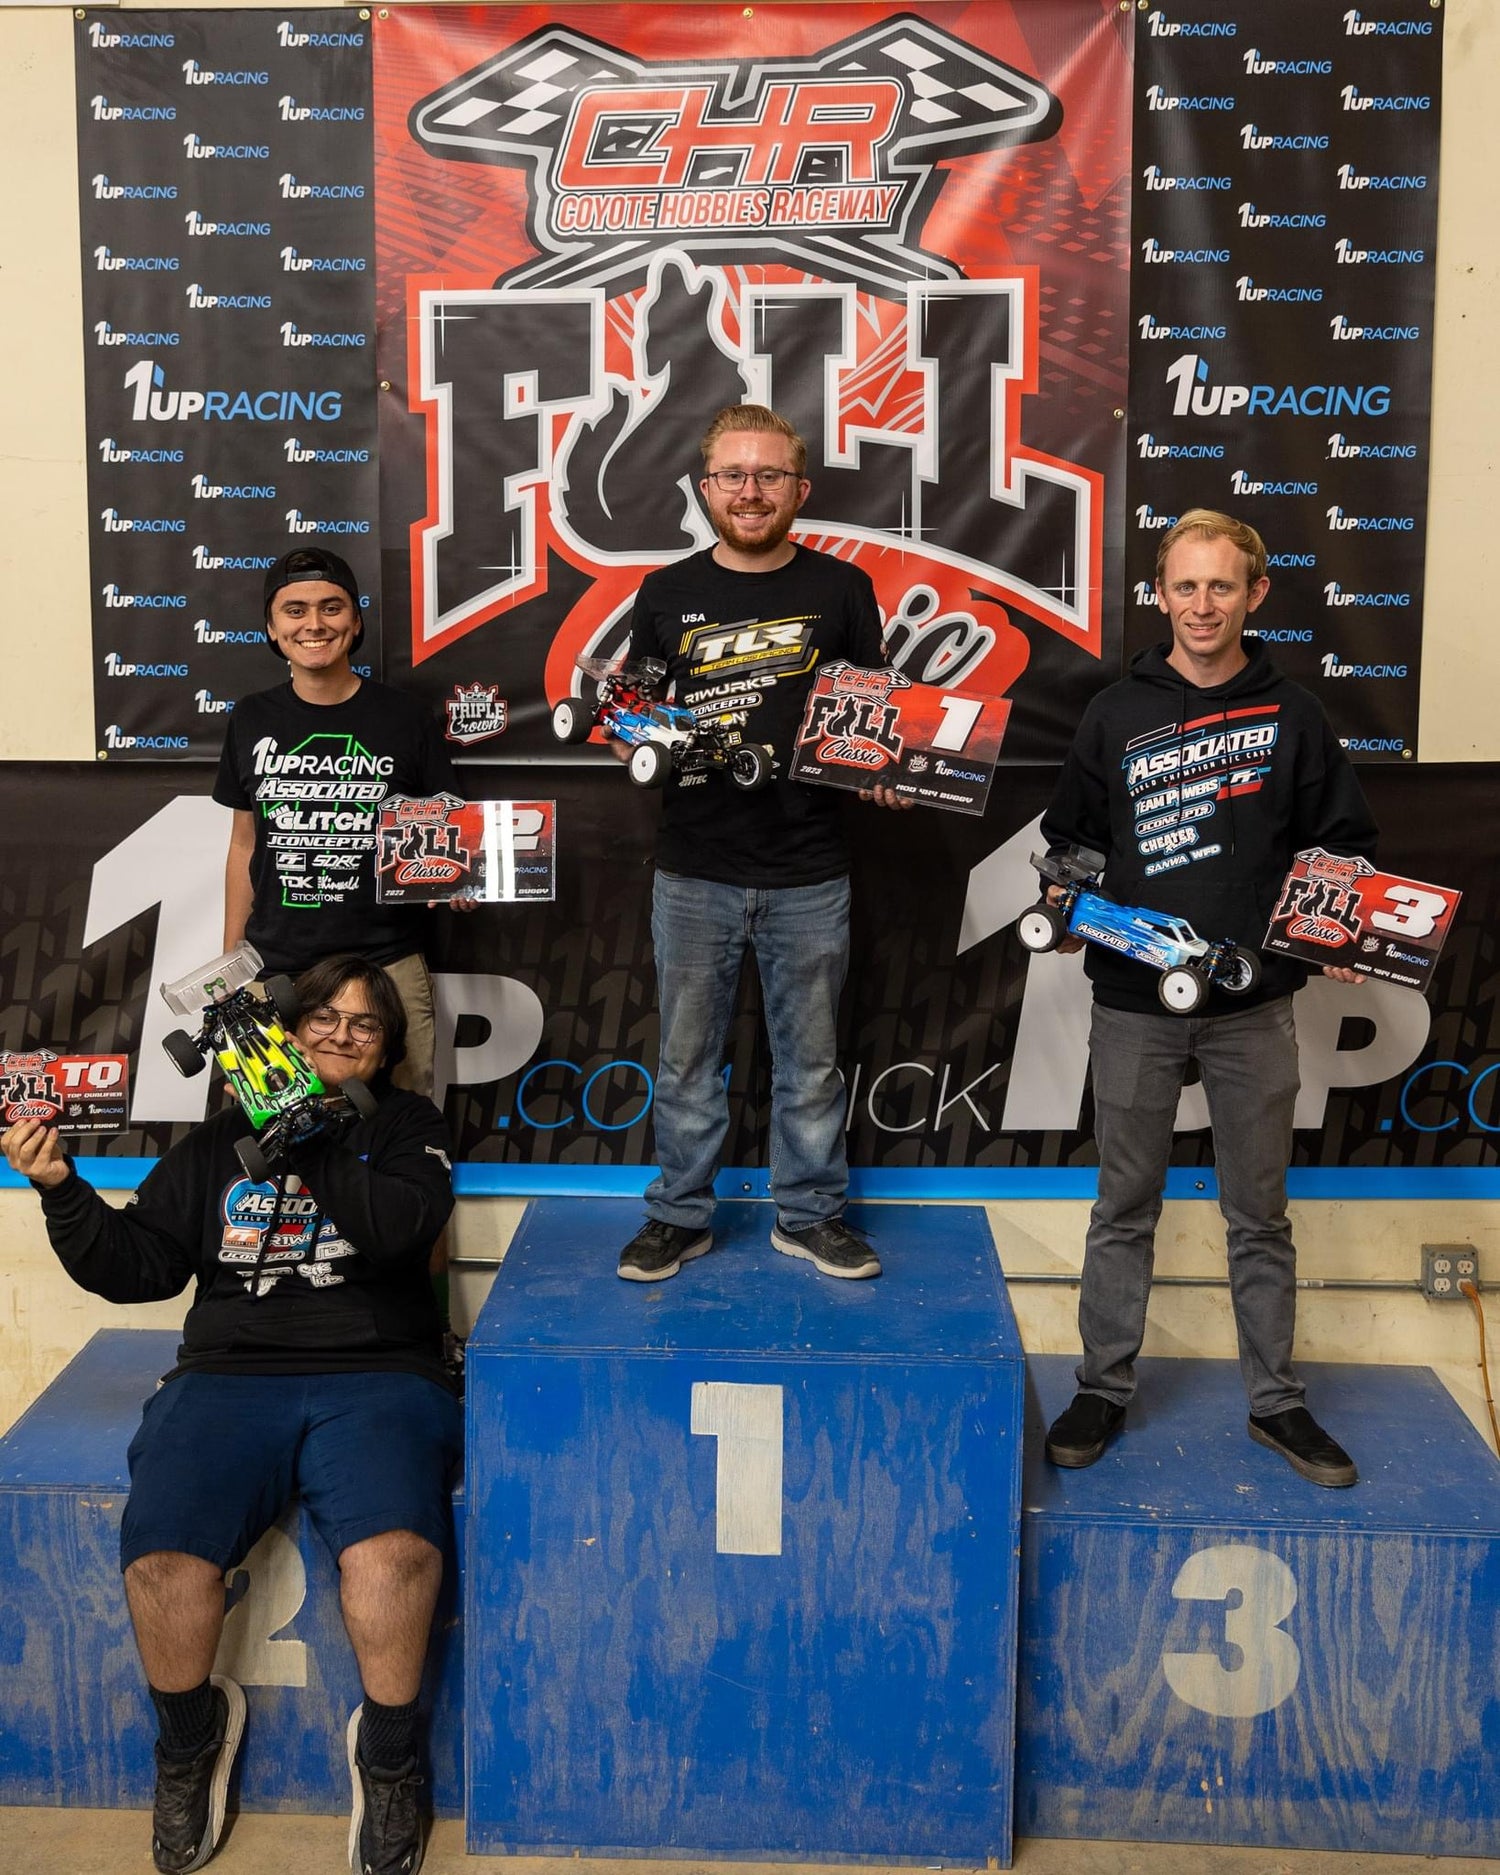 Congrats to all the Podium Finishers at the 1up Racing Fall Classic